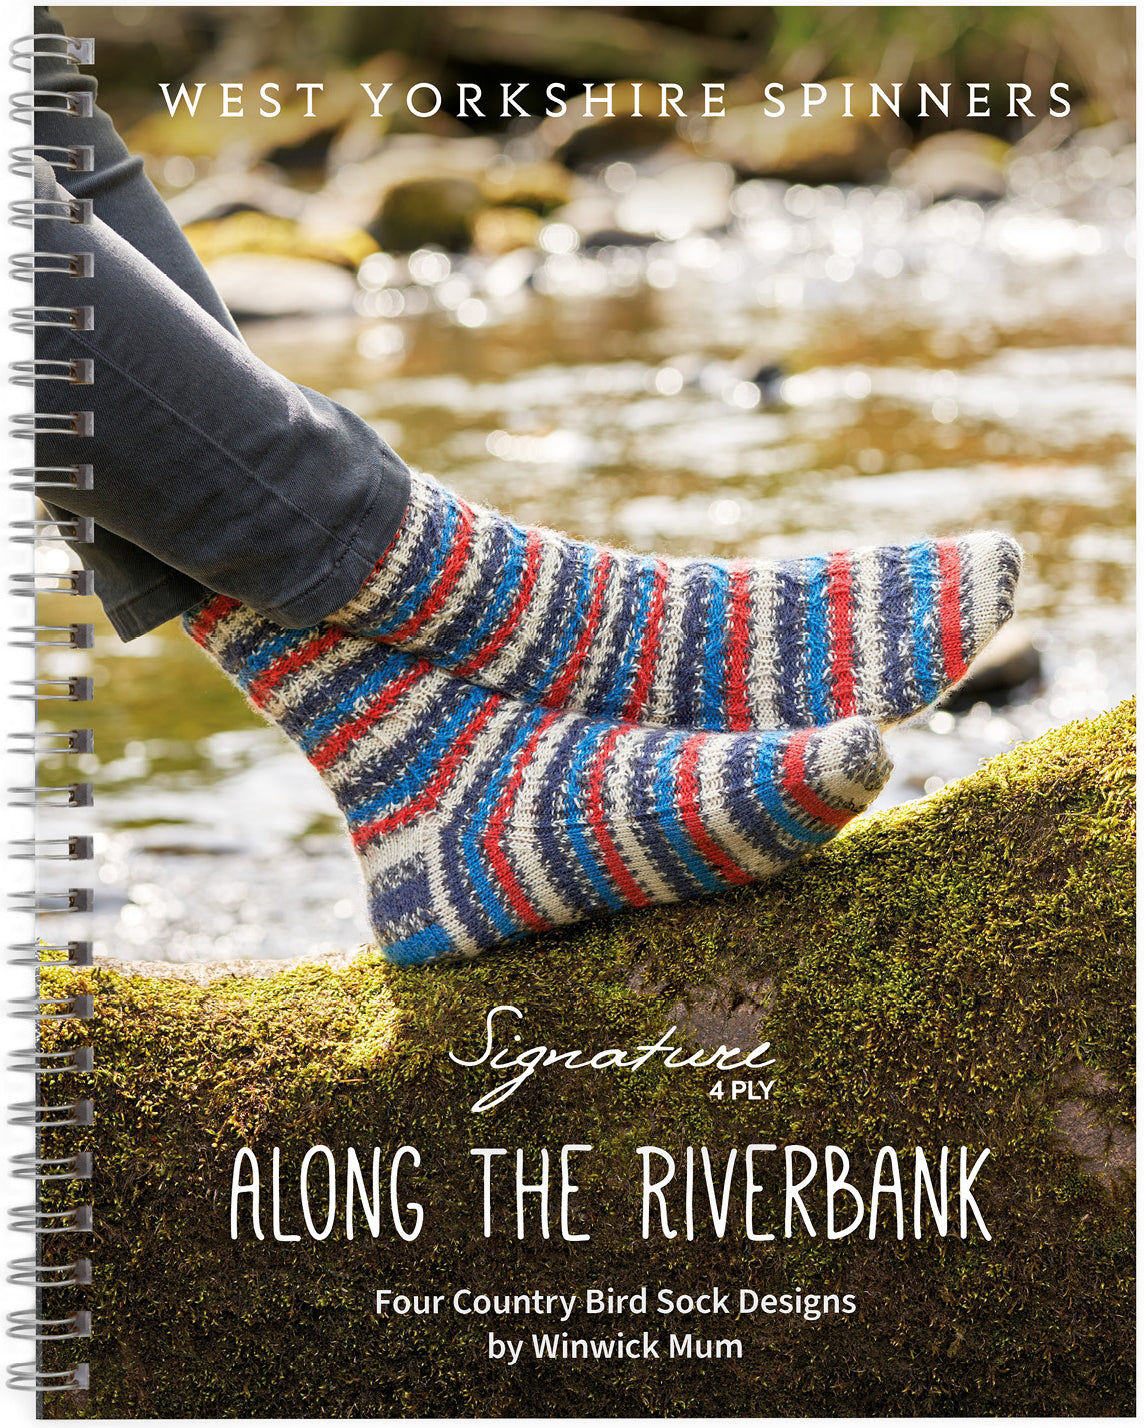 West Yorkshire Spinners Signature 4 Ply - Along the Riverbank